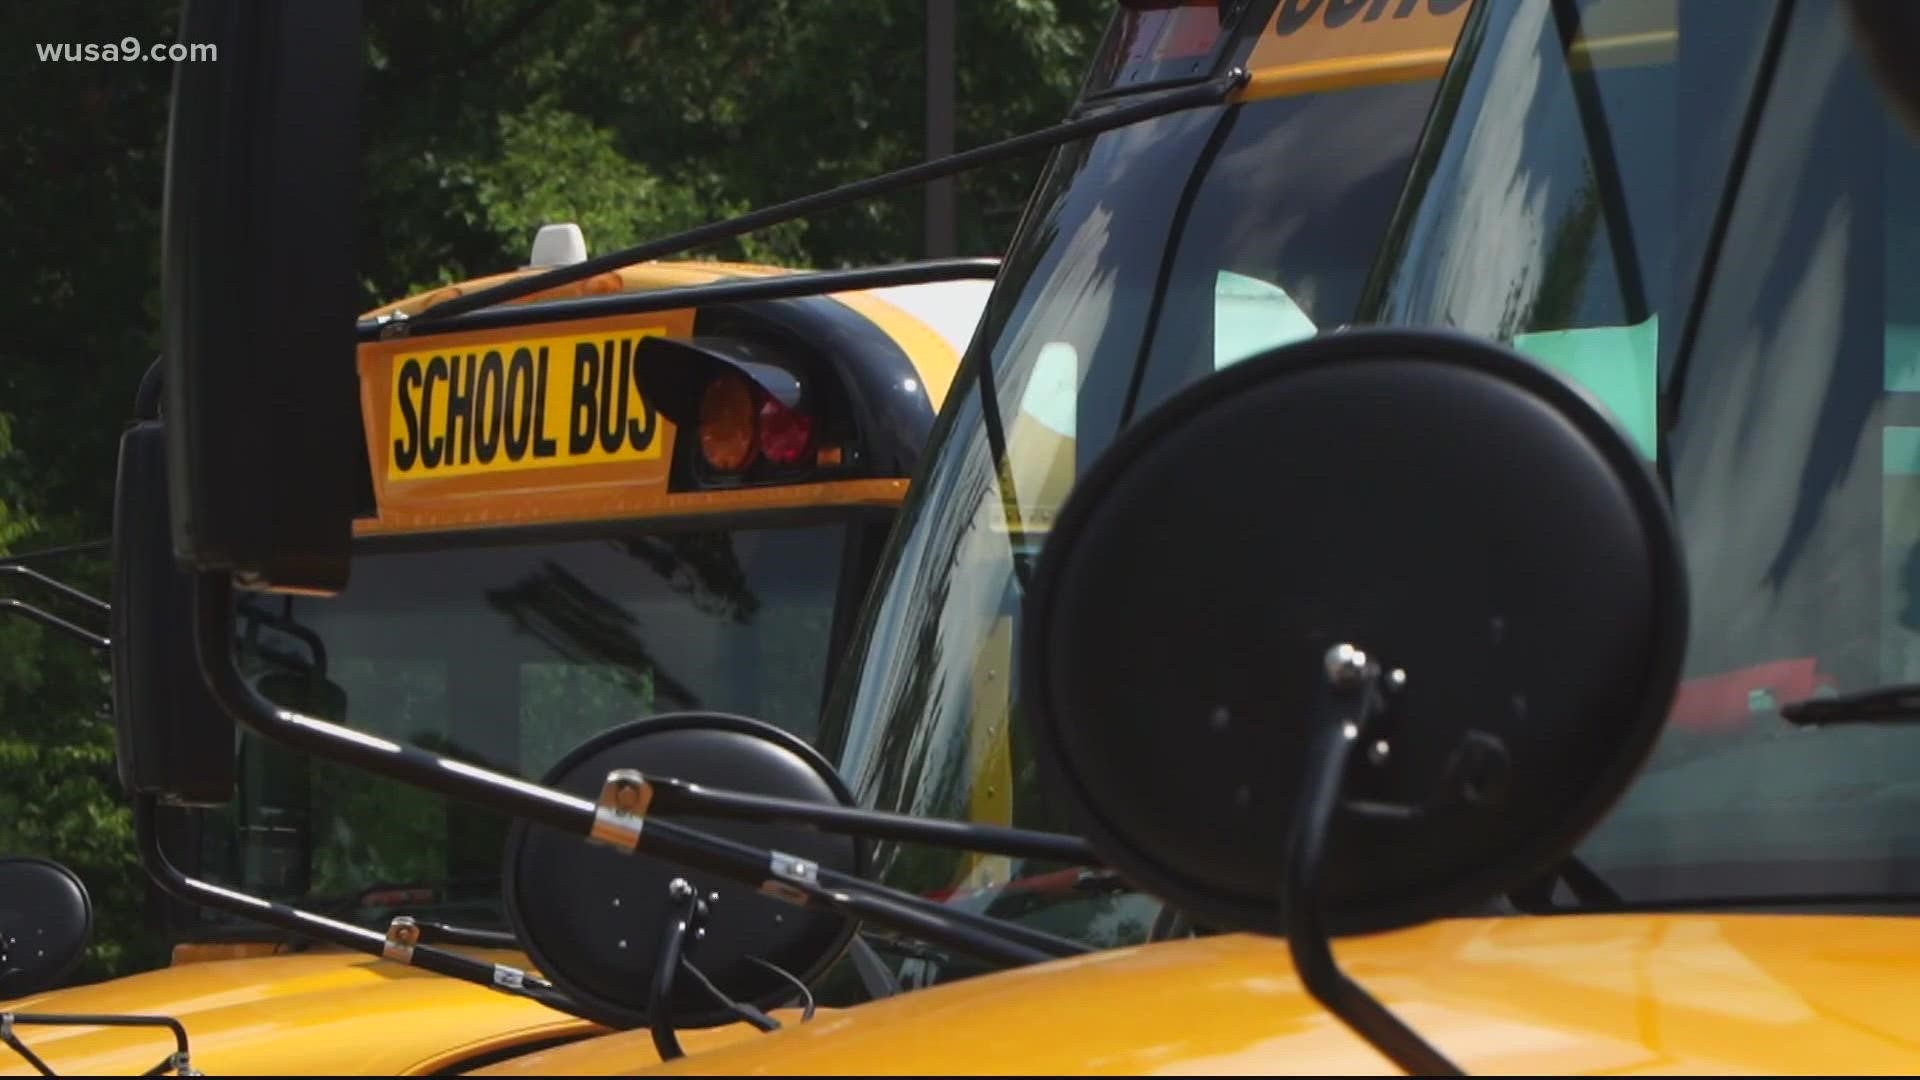 The district said in a statement on Facebook Thursday it is dealing with a bus driver shortage, as many other districts nationwide are also experiencing.